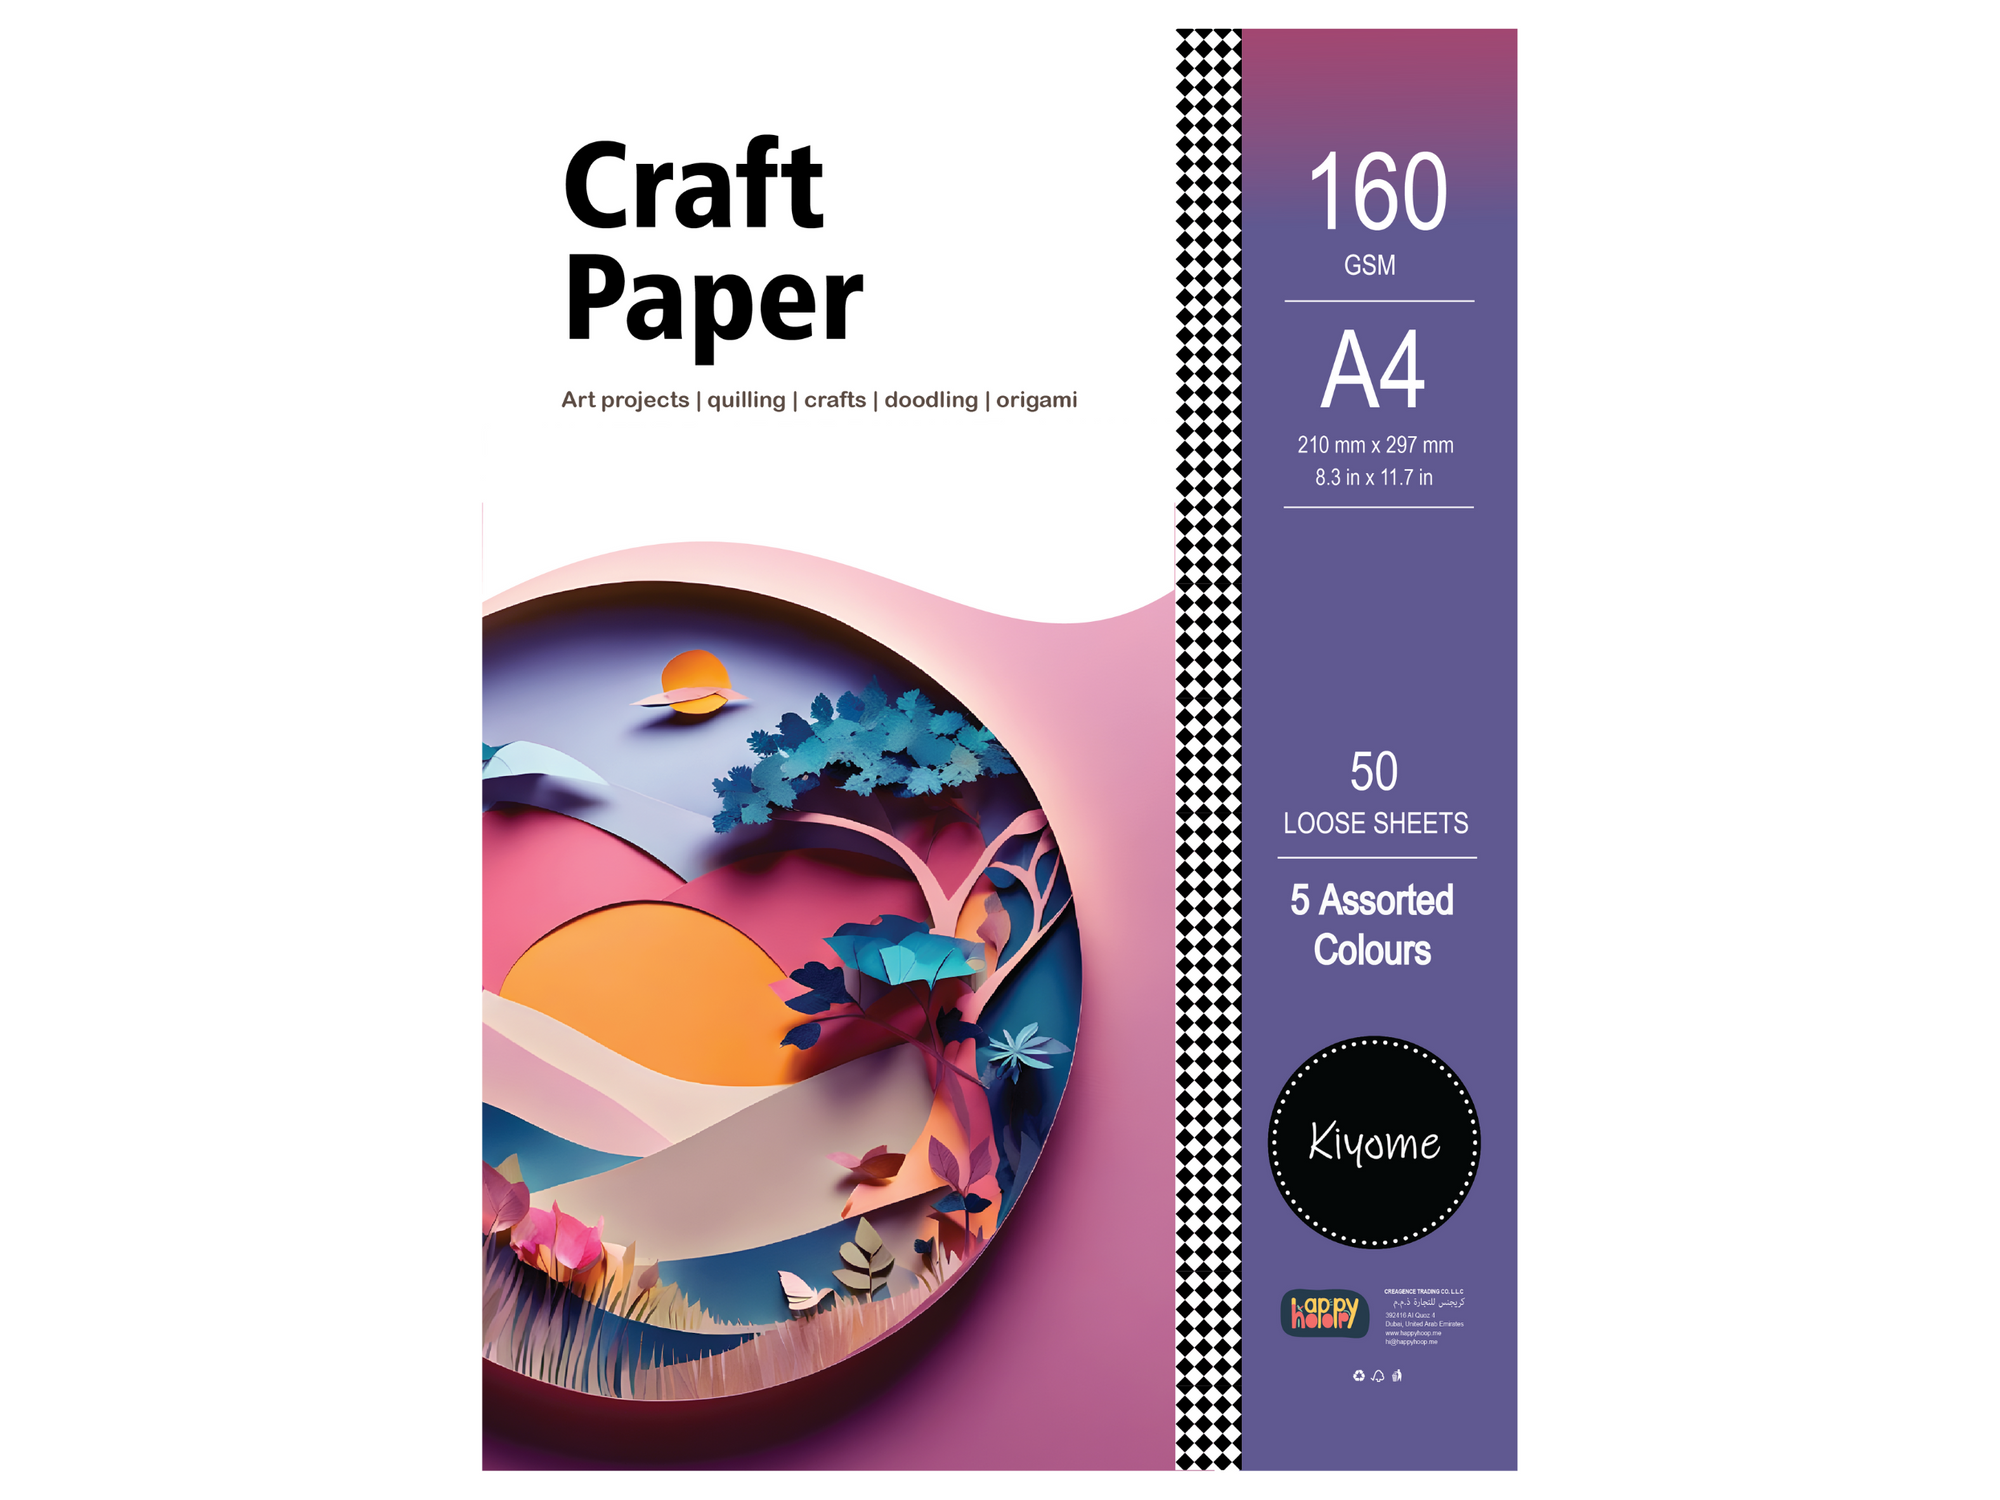 Kiyome Craft Paper | 160 GSM | A4 | 5 Assorted Colours | 50 Sheets